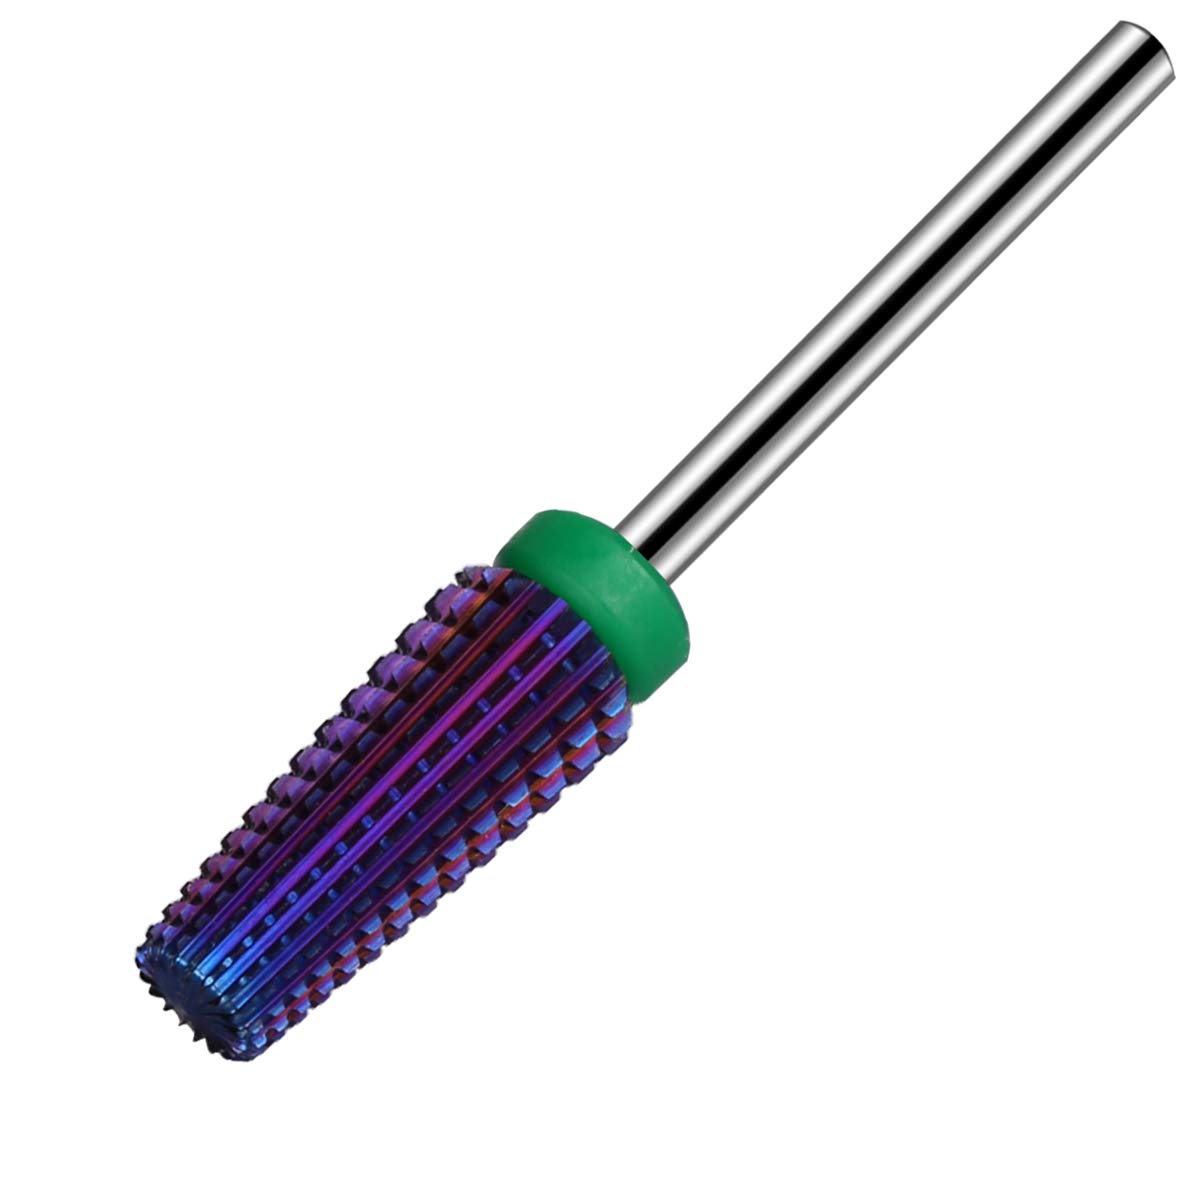 Lavinda 5 in 1 Multi-function Tapered Shape Straight Cut Nail drill bit,  Use for both Left and Right Handed, Professional Carbide Tungsten Steel bits  for Acrylic Nail Gel Fast Remove (Coarse, Purple)